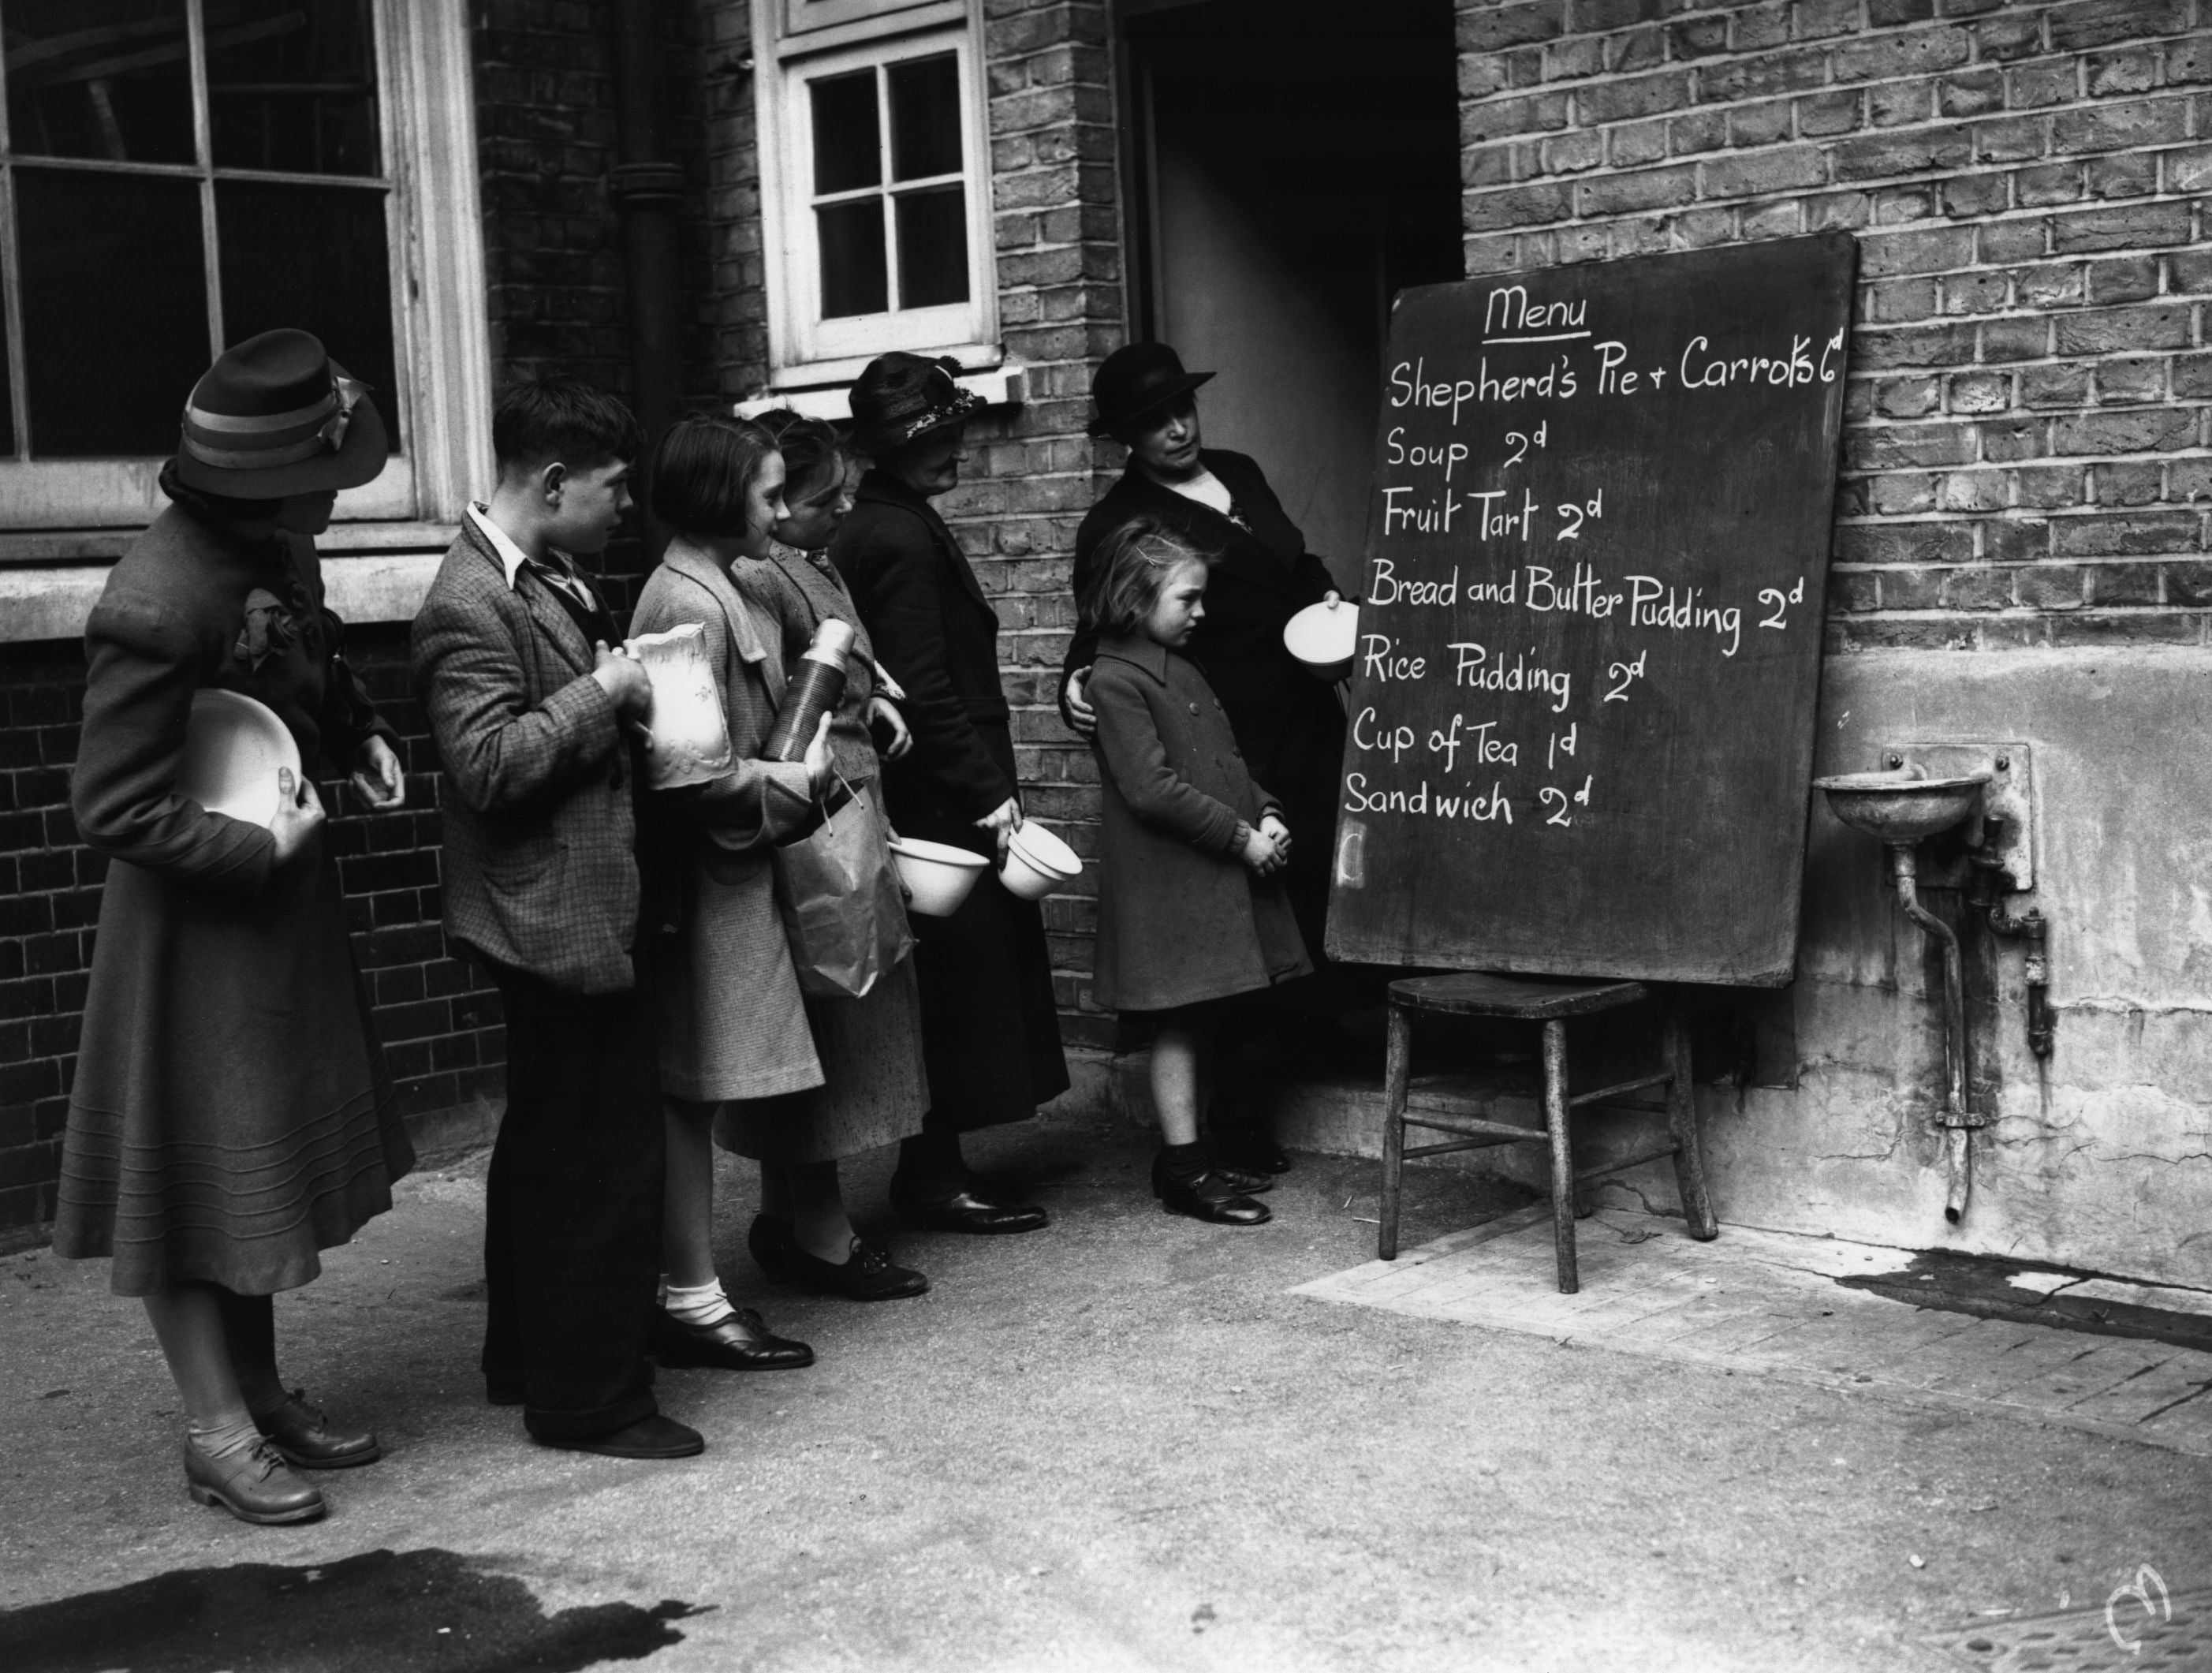 People look at a basic menu while queuing to get into a makeshift canteen in 1940